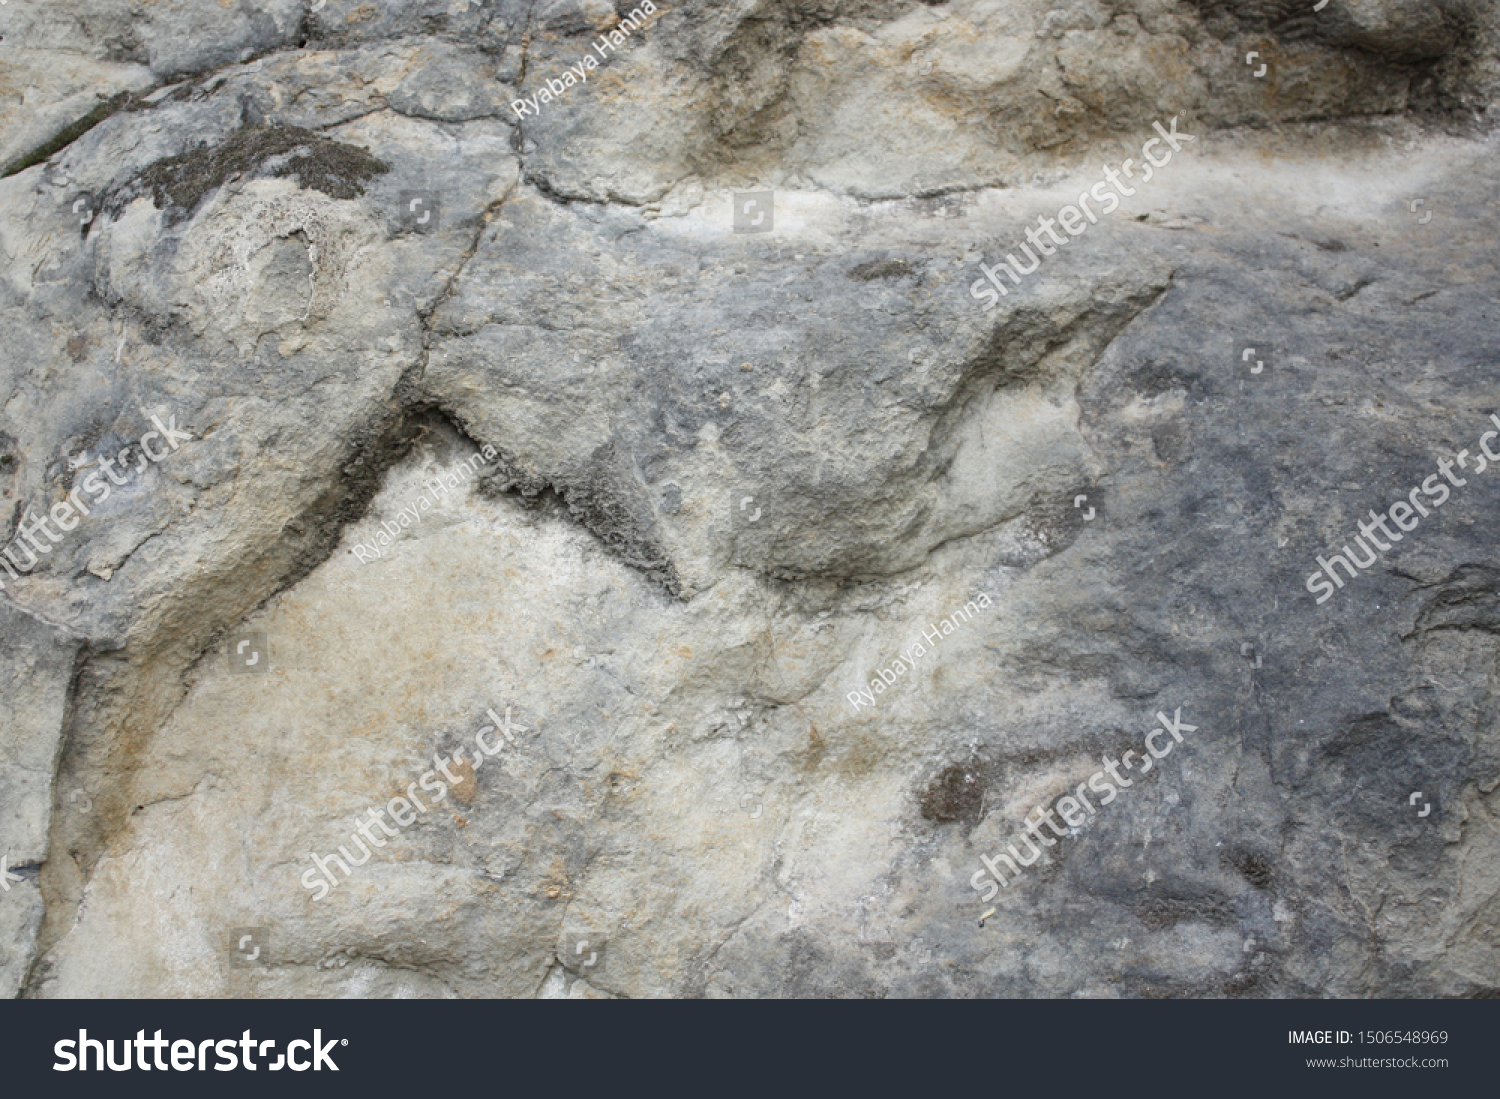 Stone texture. Rock background. Texture of rock material. Rock on the mountain. #1506548969